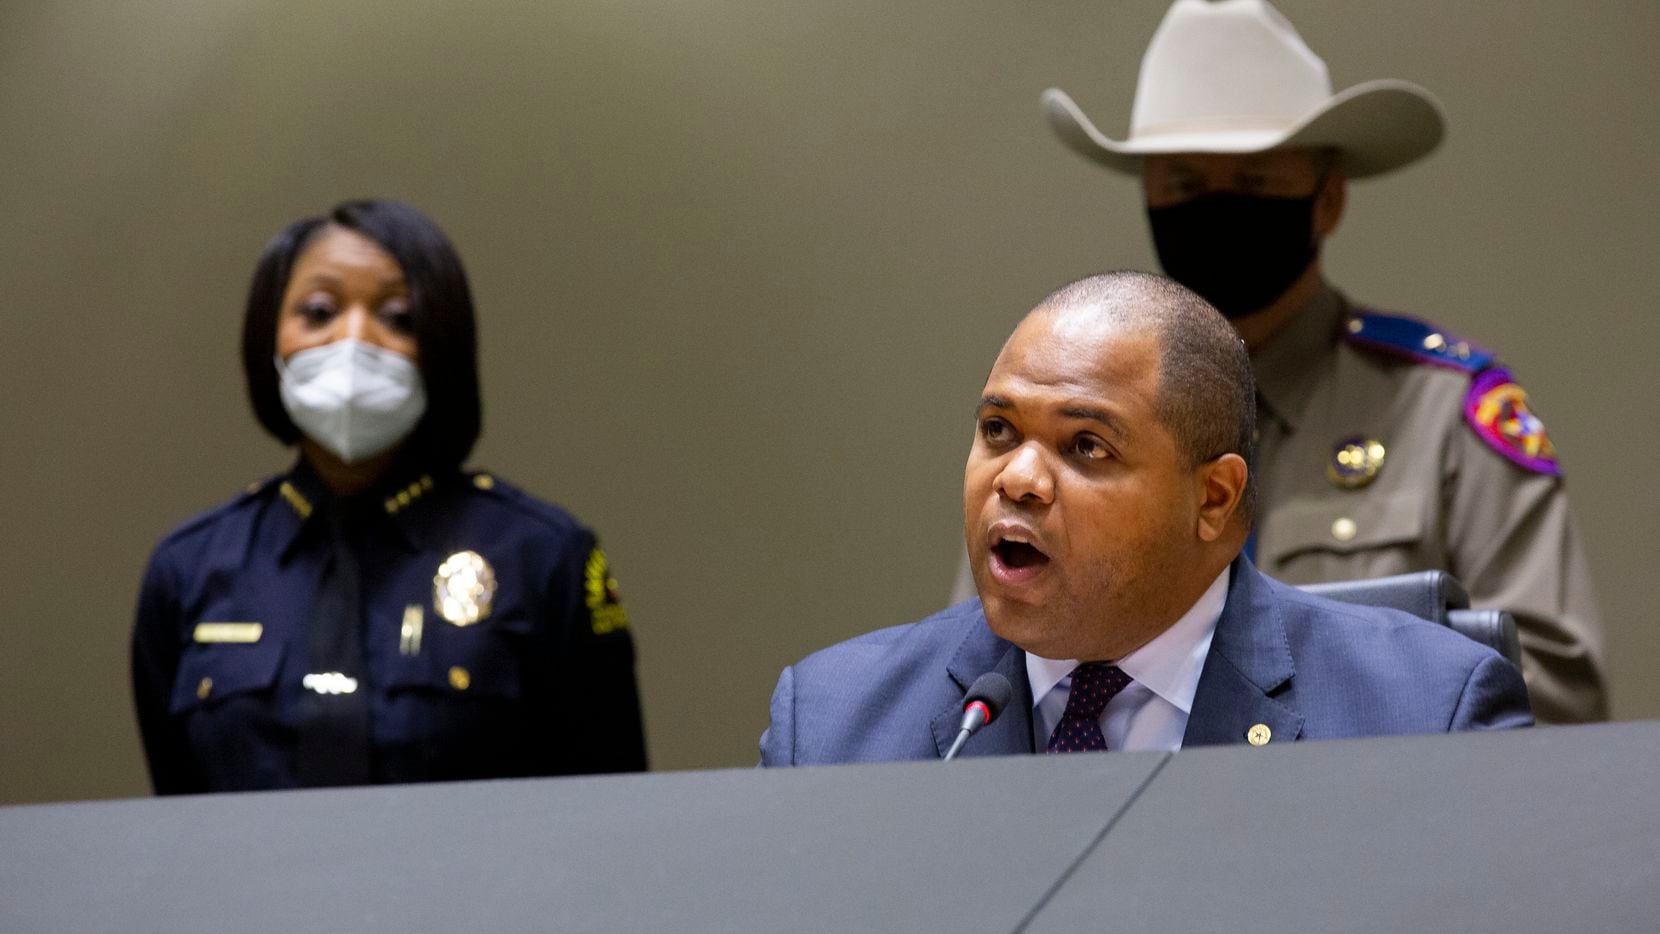 Dallas Mayor Eric Johnson opposed a budget amendment that passed that will cut $7 million...